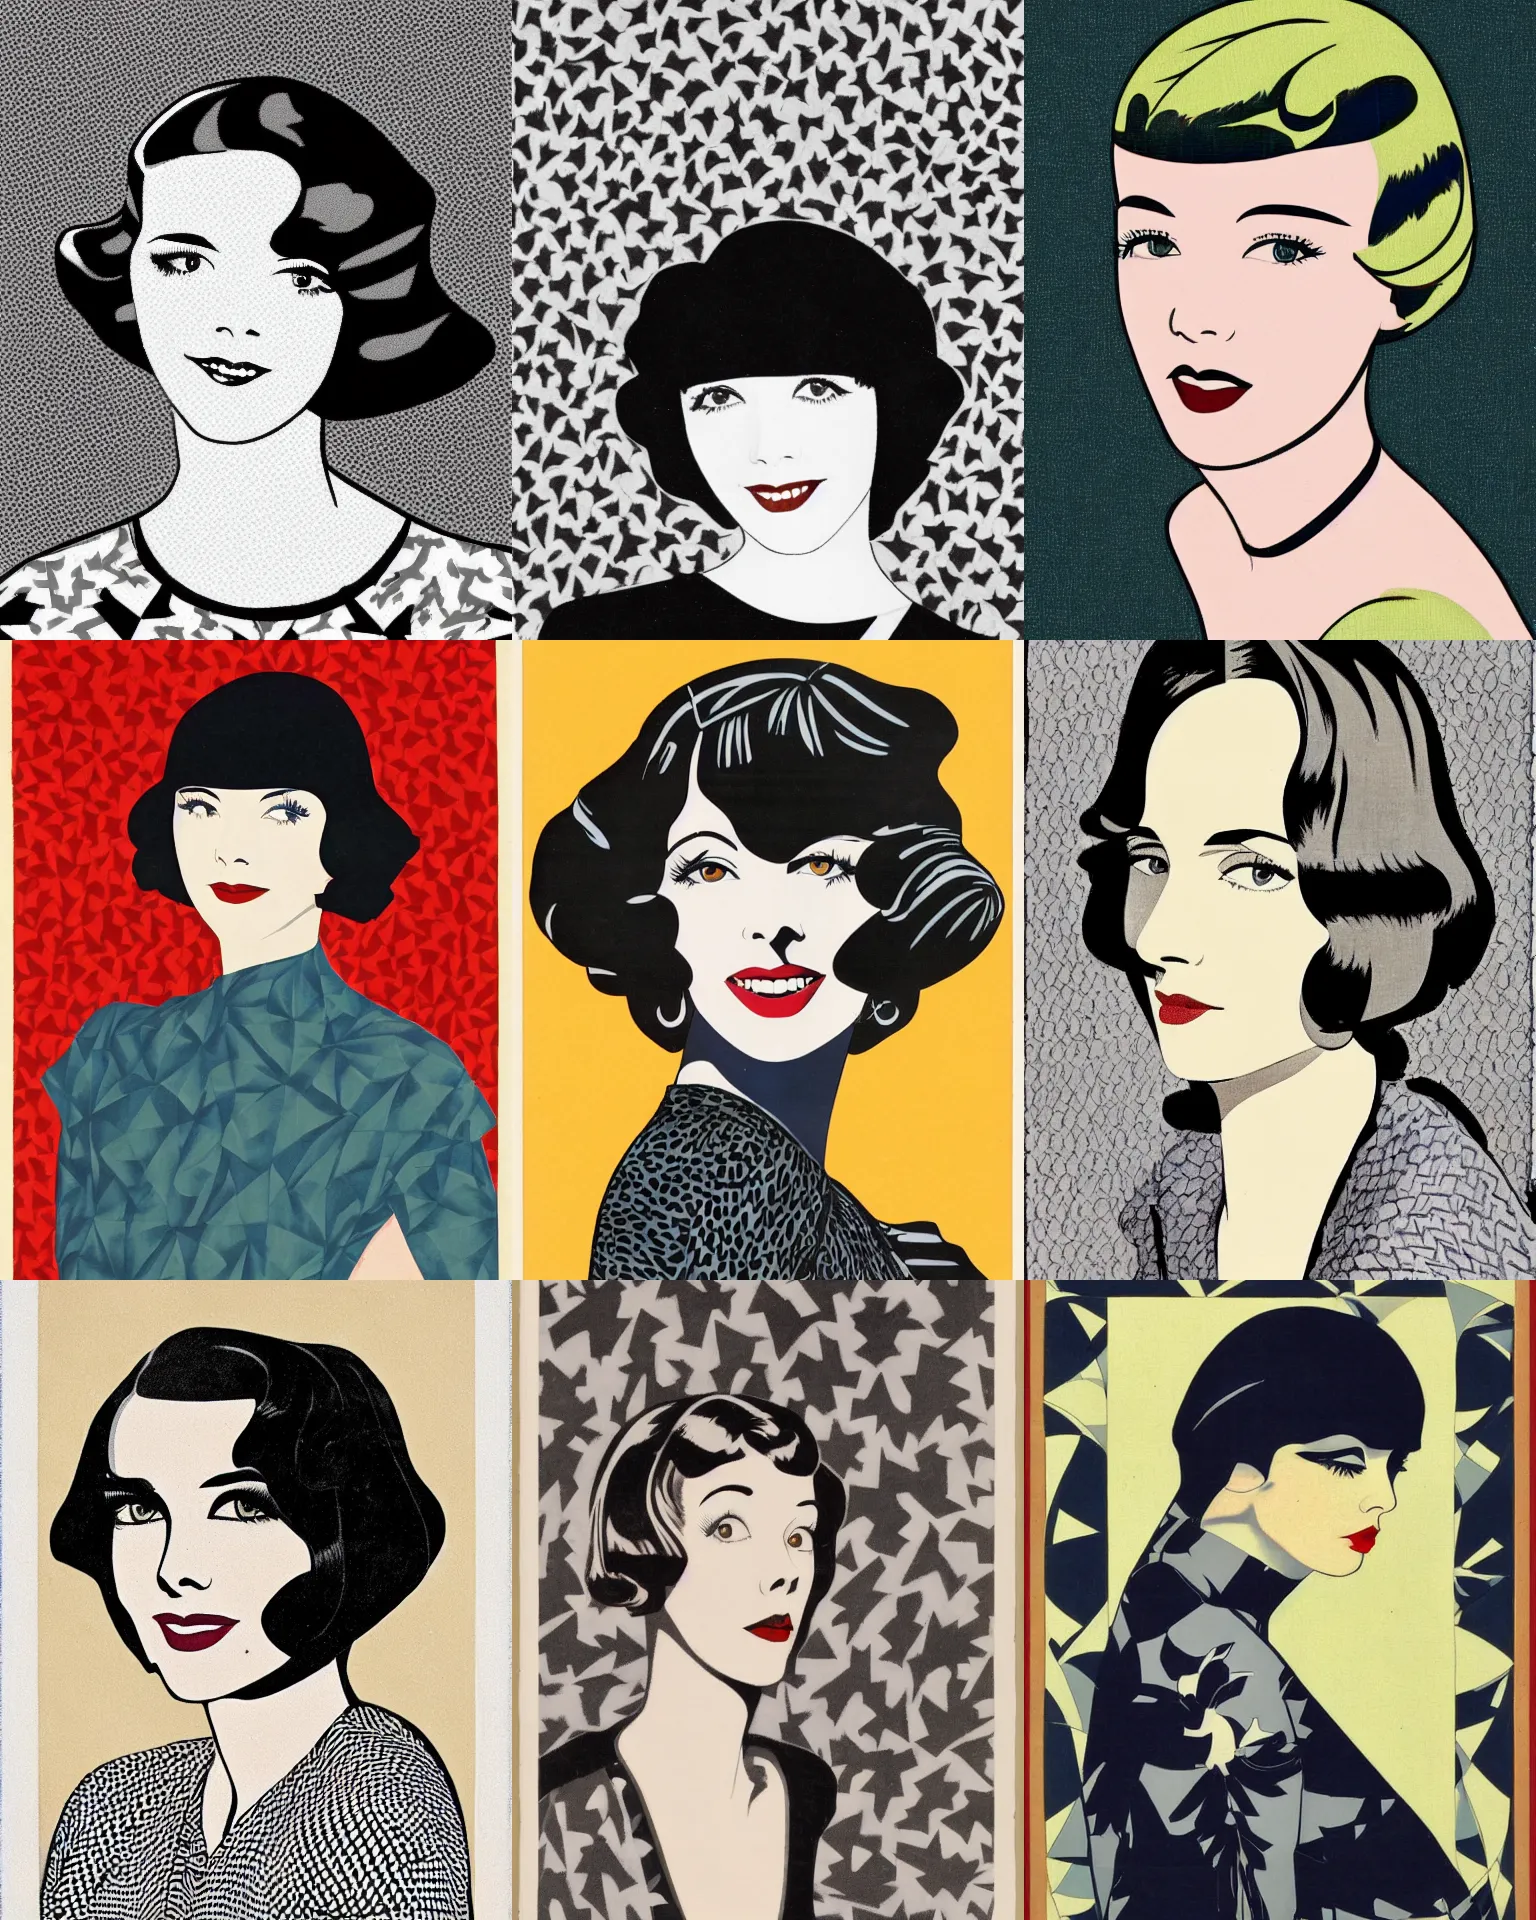 Prompt: Colleen Moore 25 years old, bob haircut, portrait by Patrick Nagel, 1920s, patterned tessellation